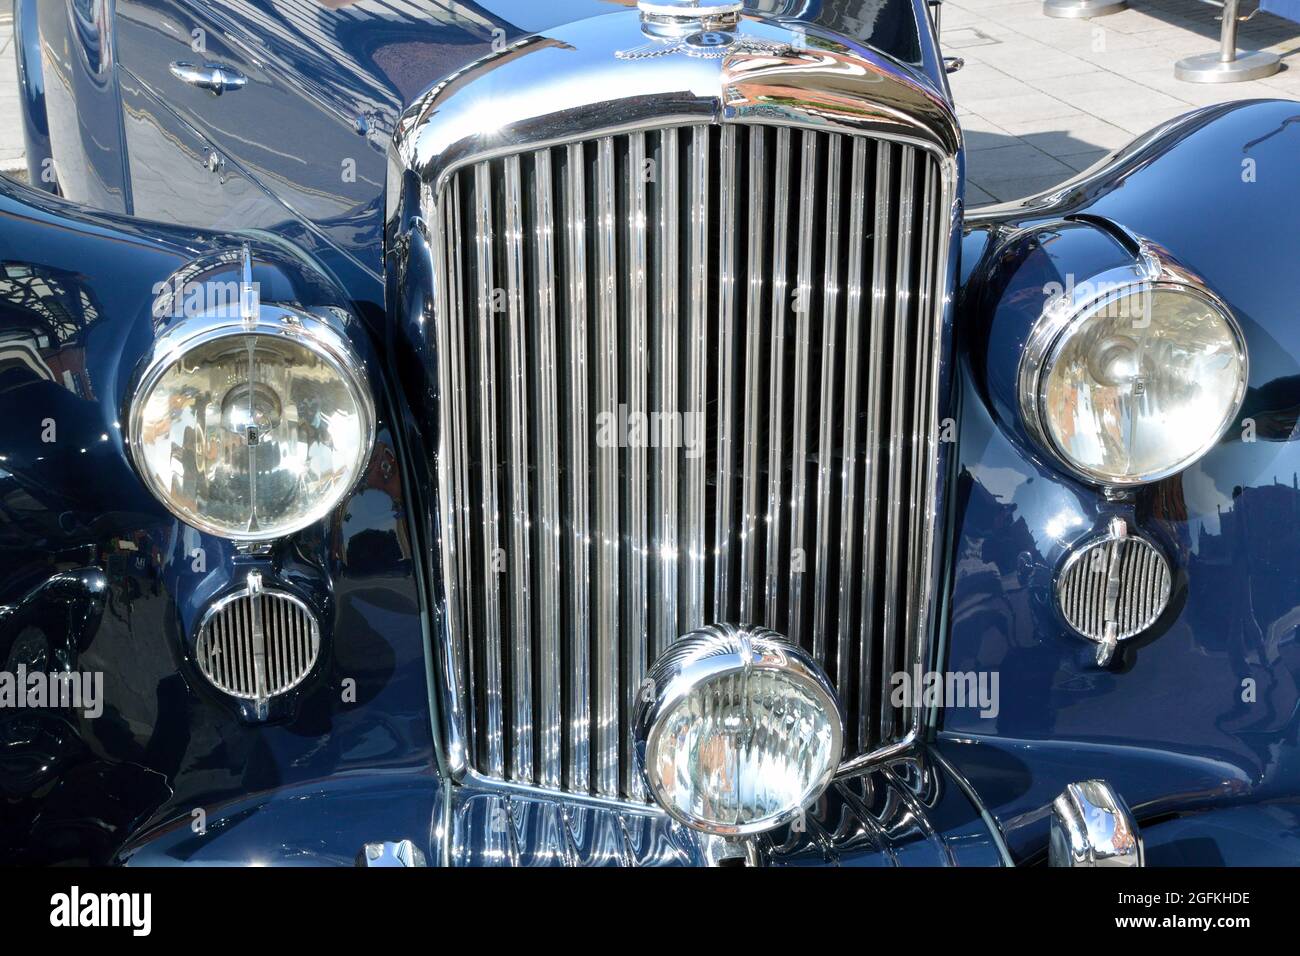 Rare 1950 Bentley Mark 6 drophead coupe belonging to Maids Head Hotel, Norwich Stock Photo